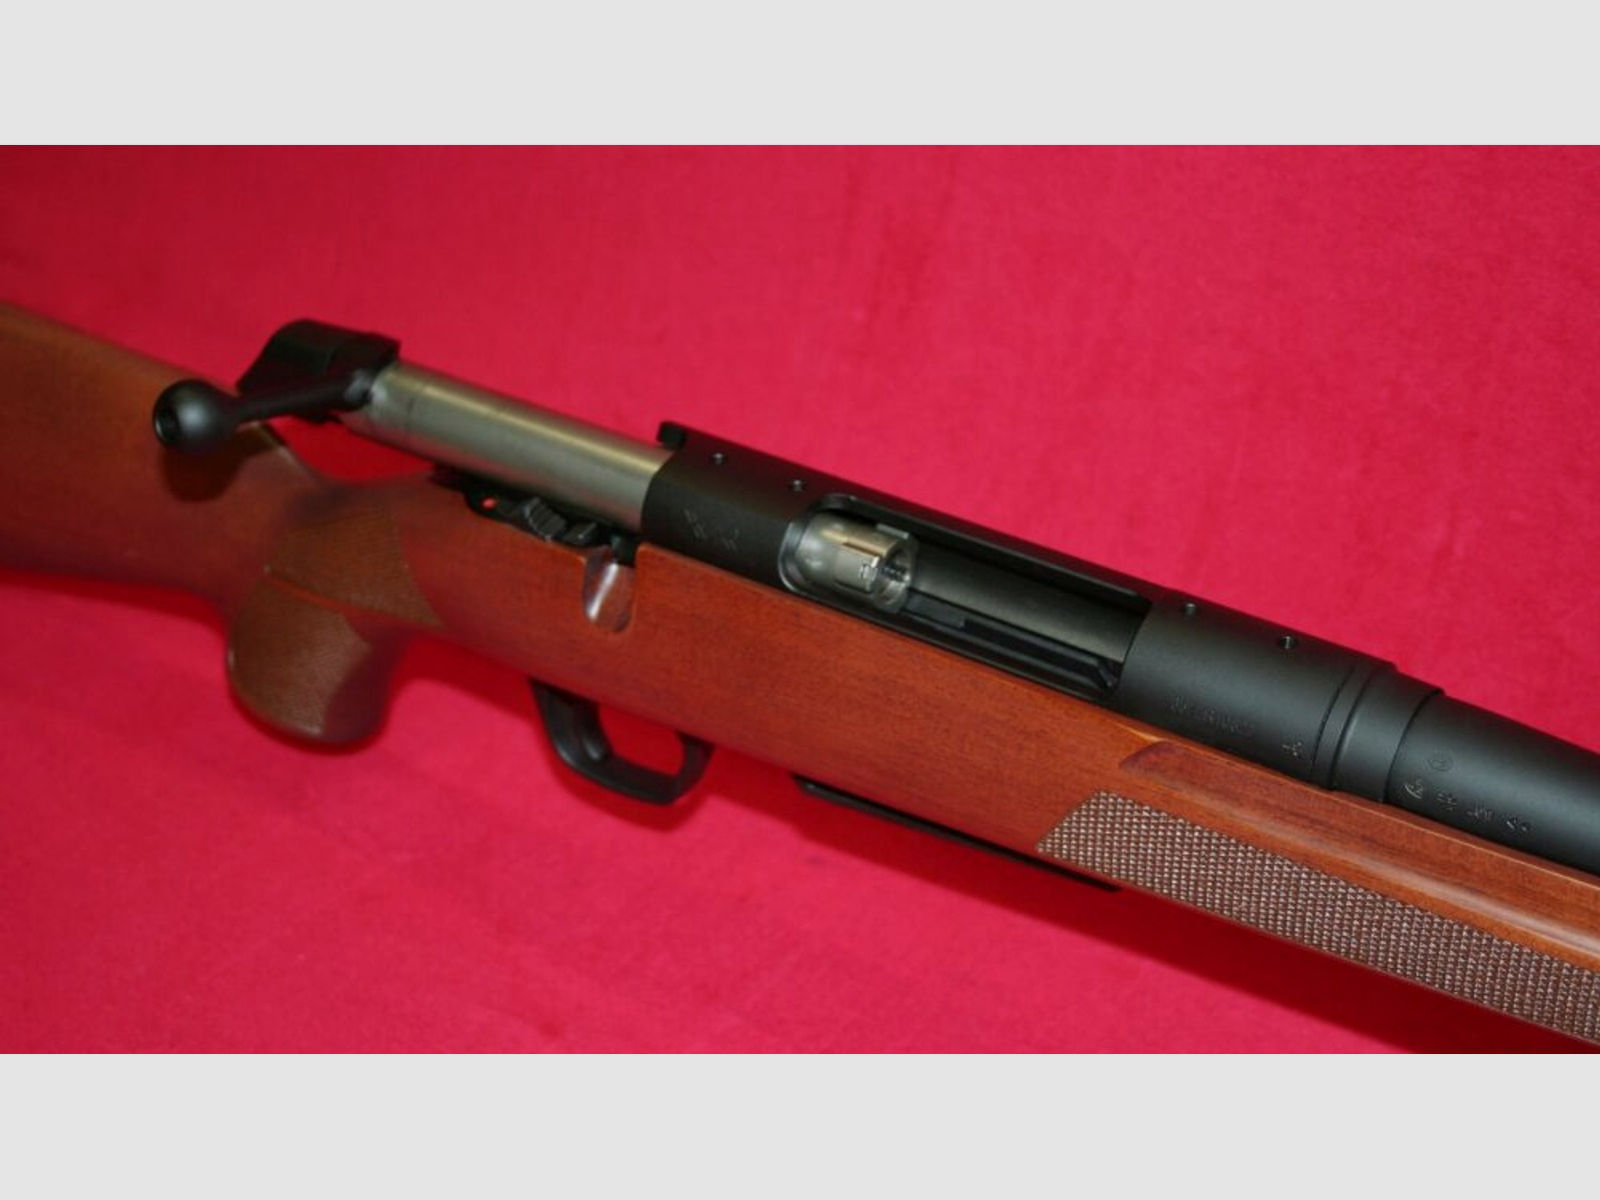 Winchester	 XPR Sporter